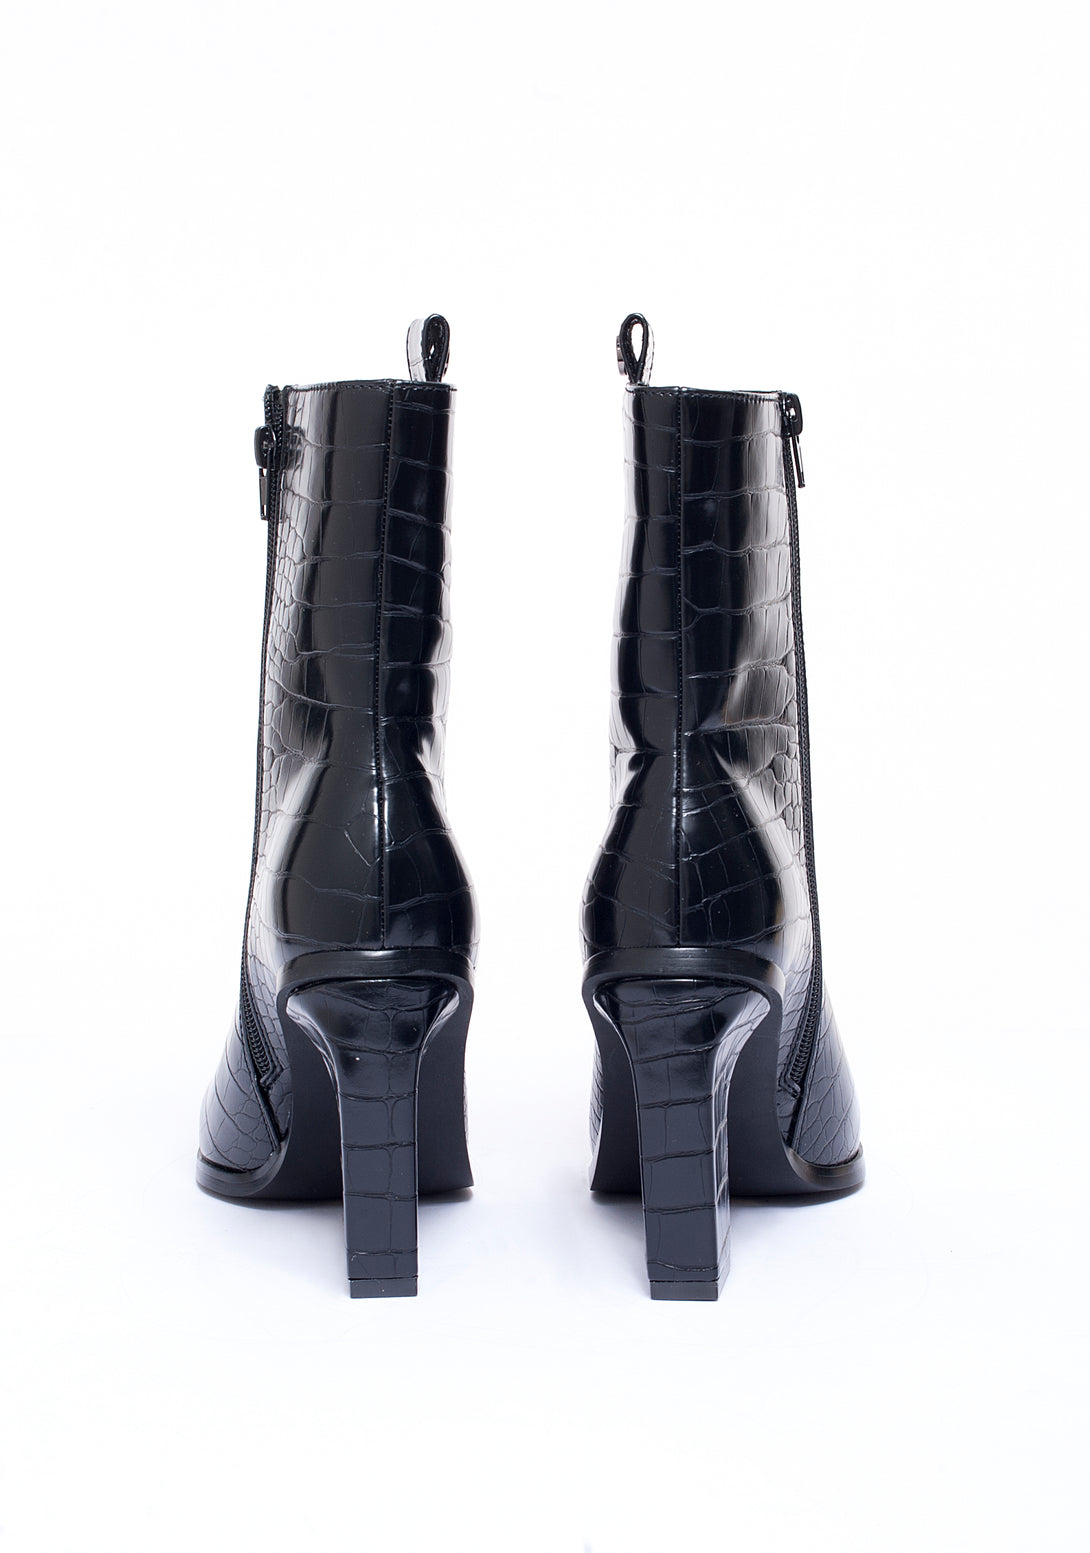 Ankle boots made in leather with crocodile print